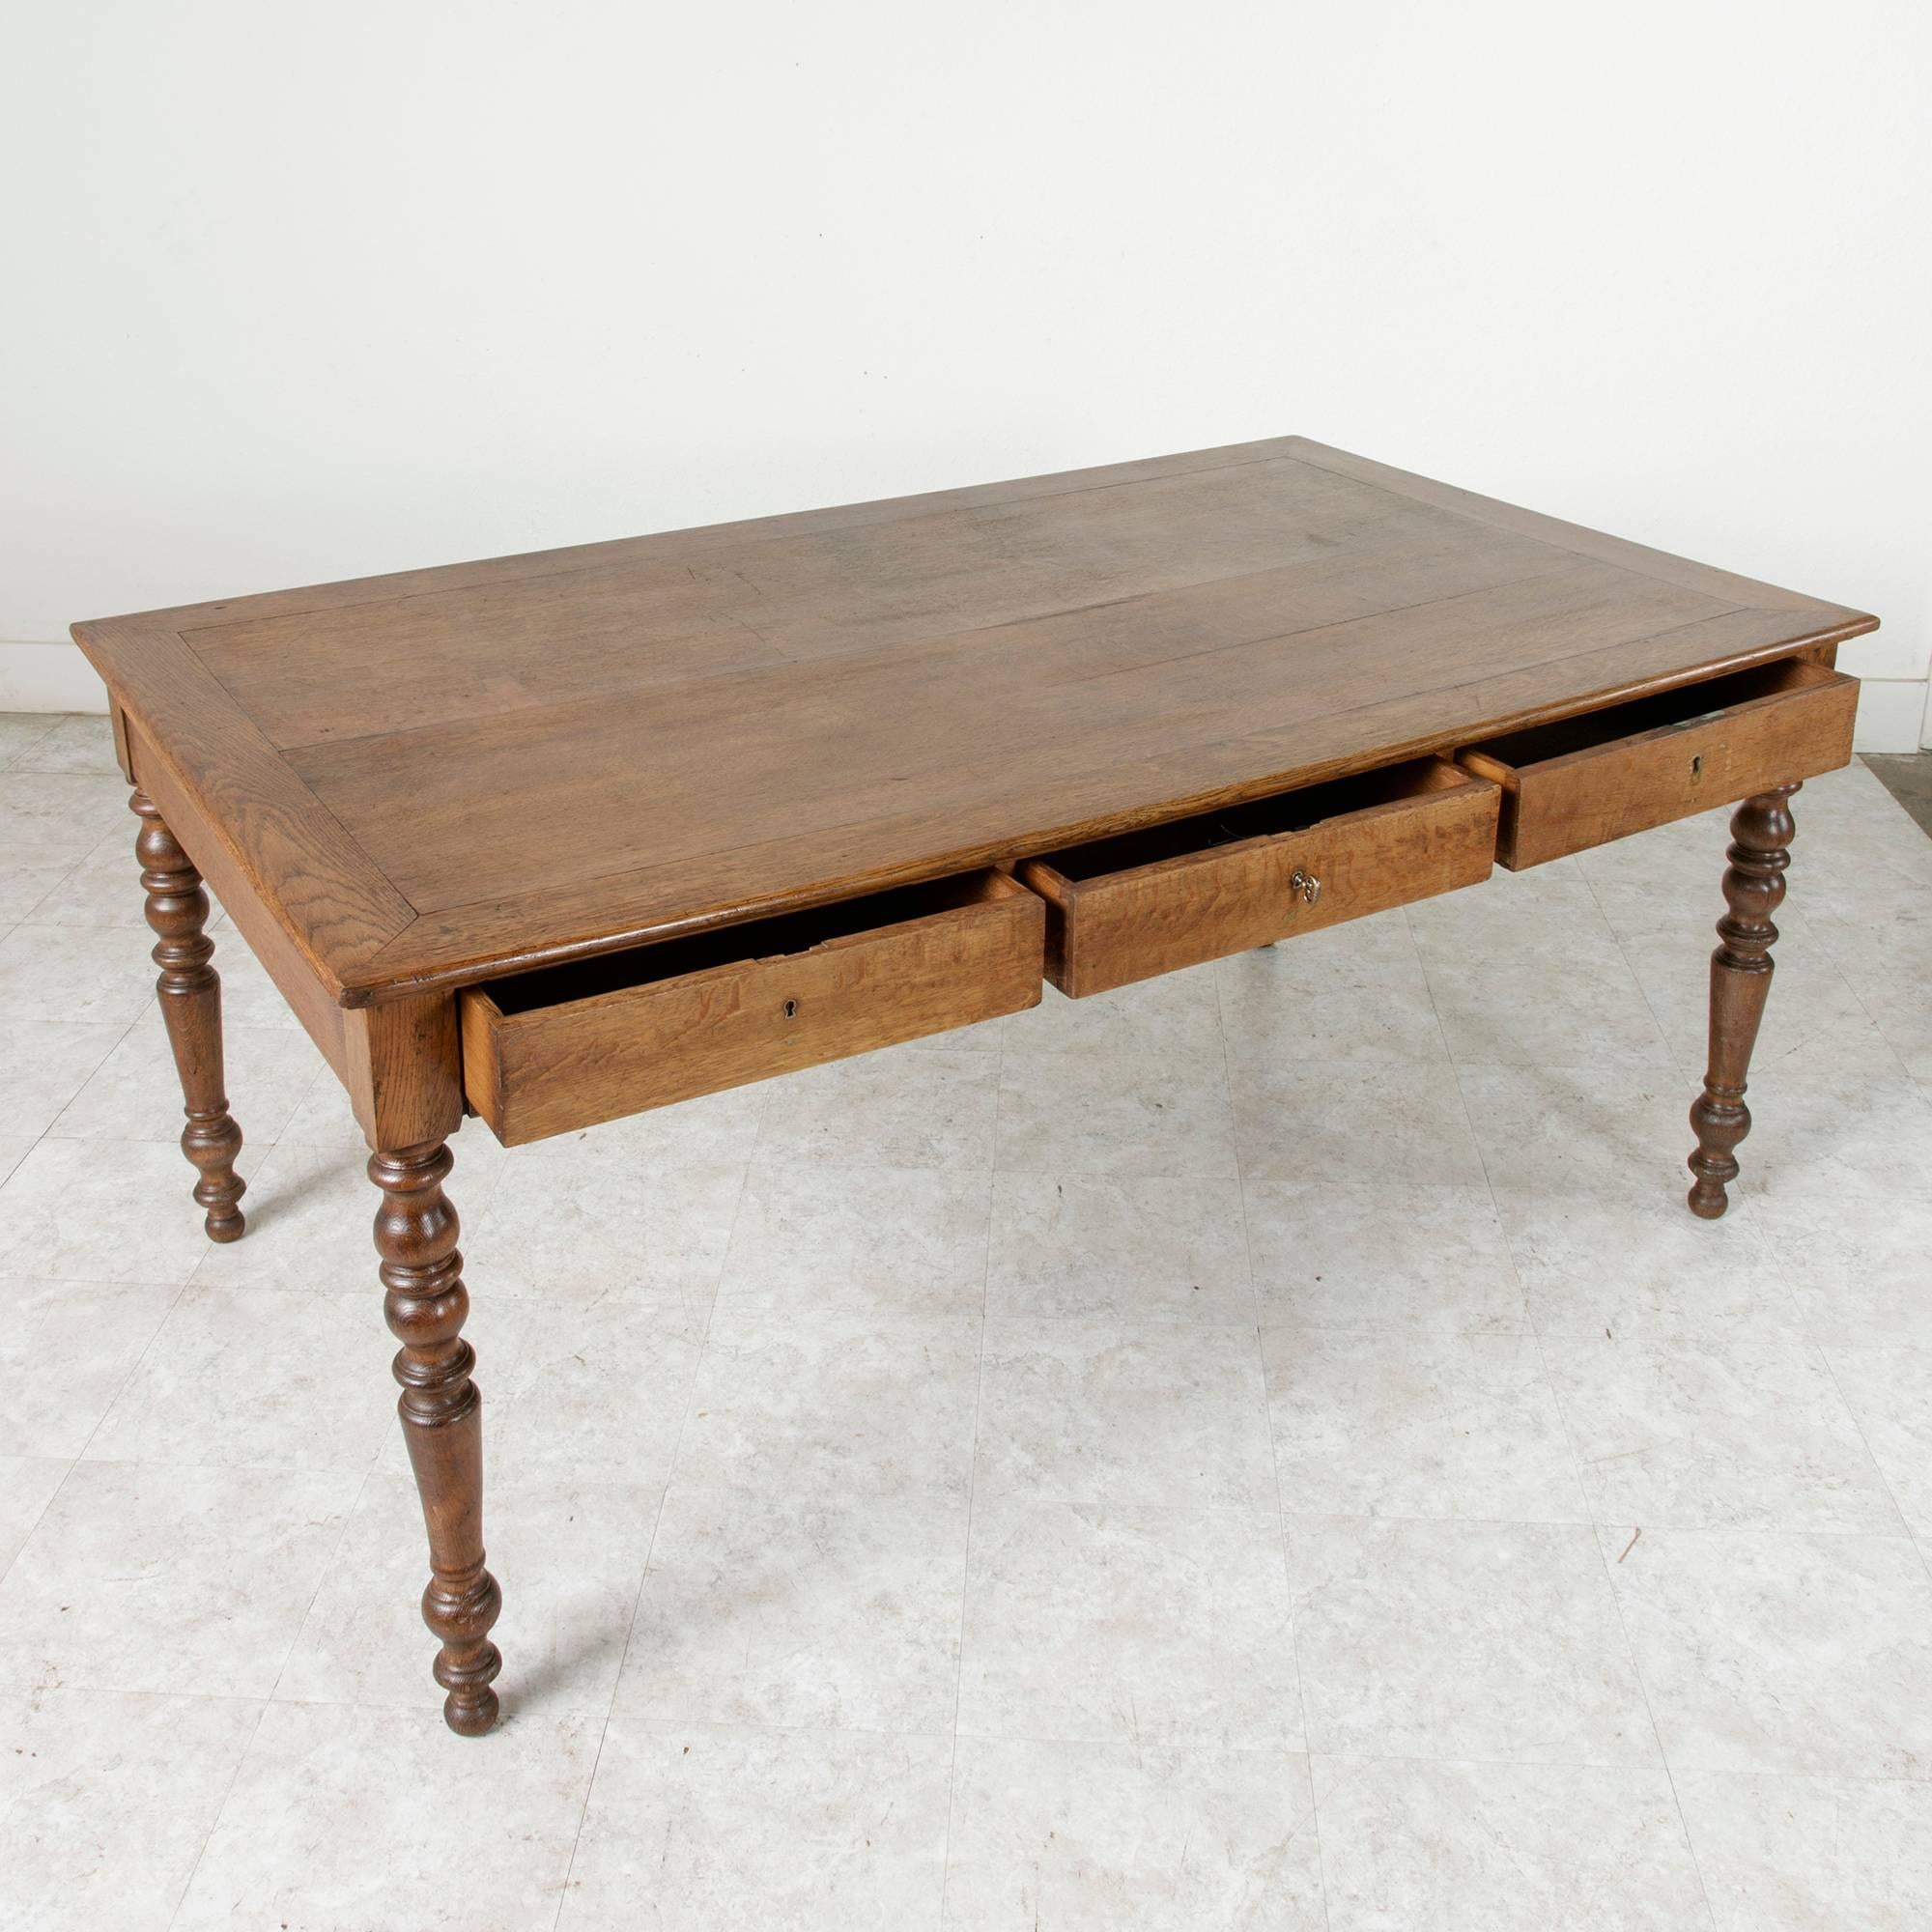 This turn of the century artisan-made oak farm table features hand-turned legs and three drawers on one side, ideal for storing place settings, silverware, or table linens. With its simplicity in form and age-worn wood, this circa 1900 Normandy farm